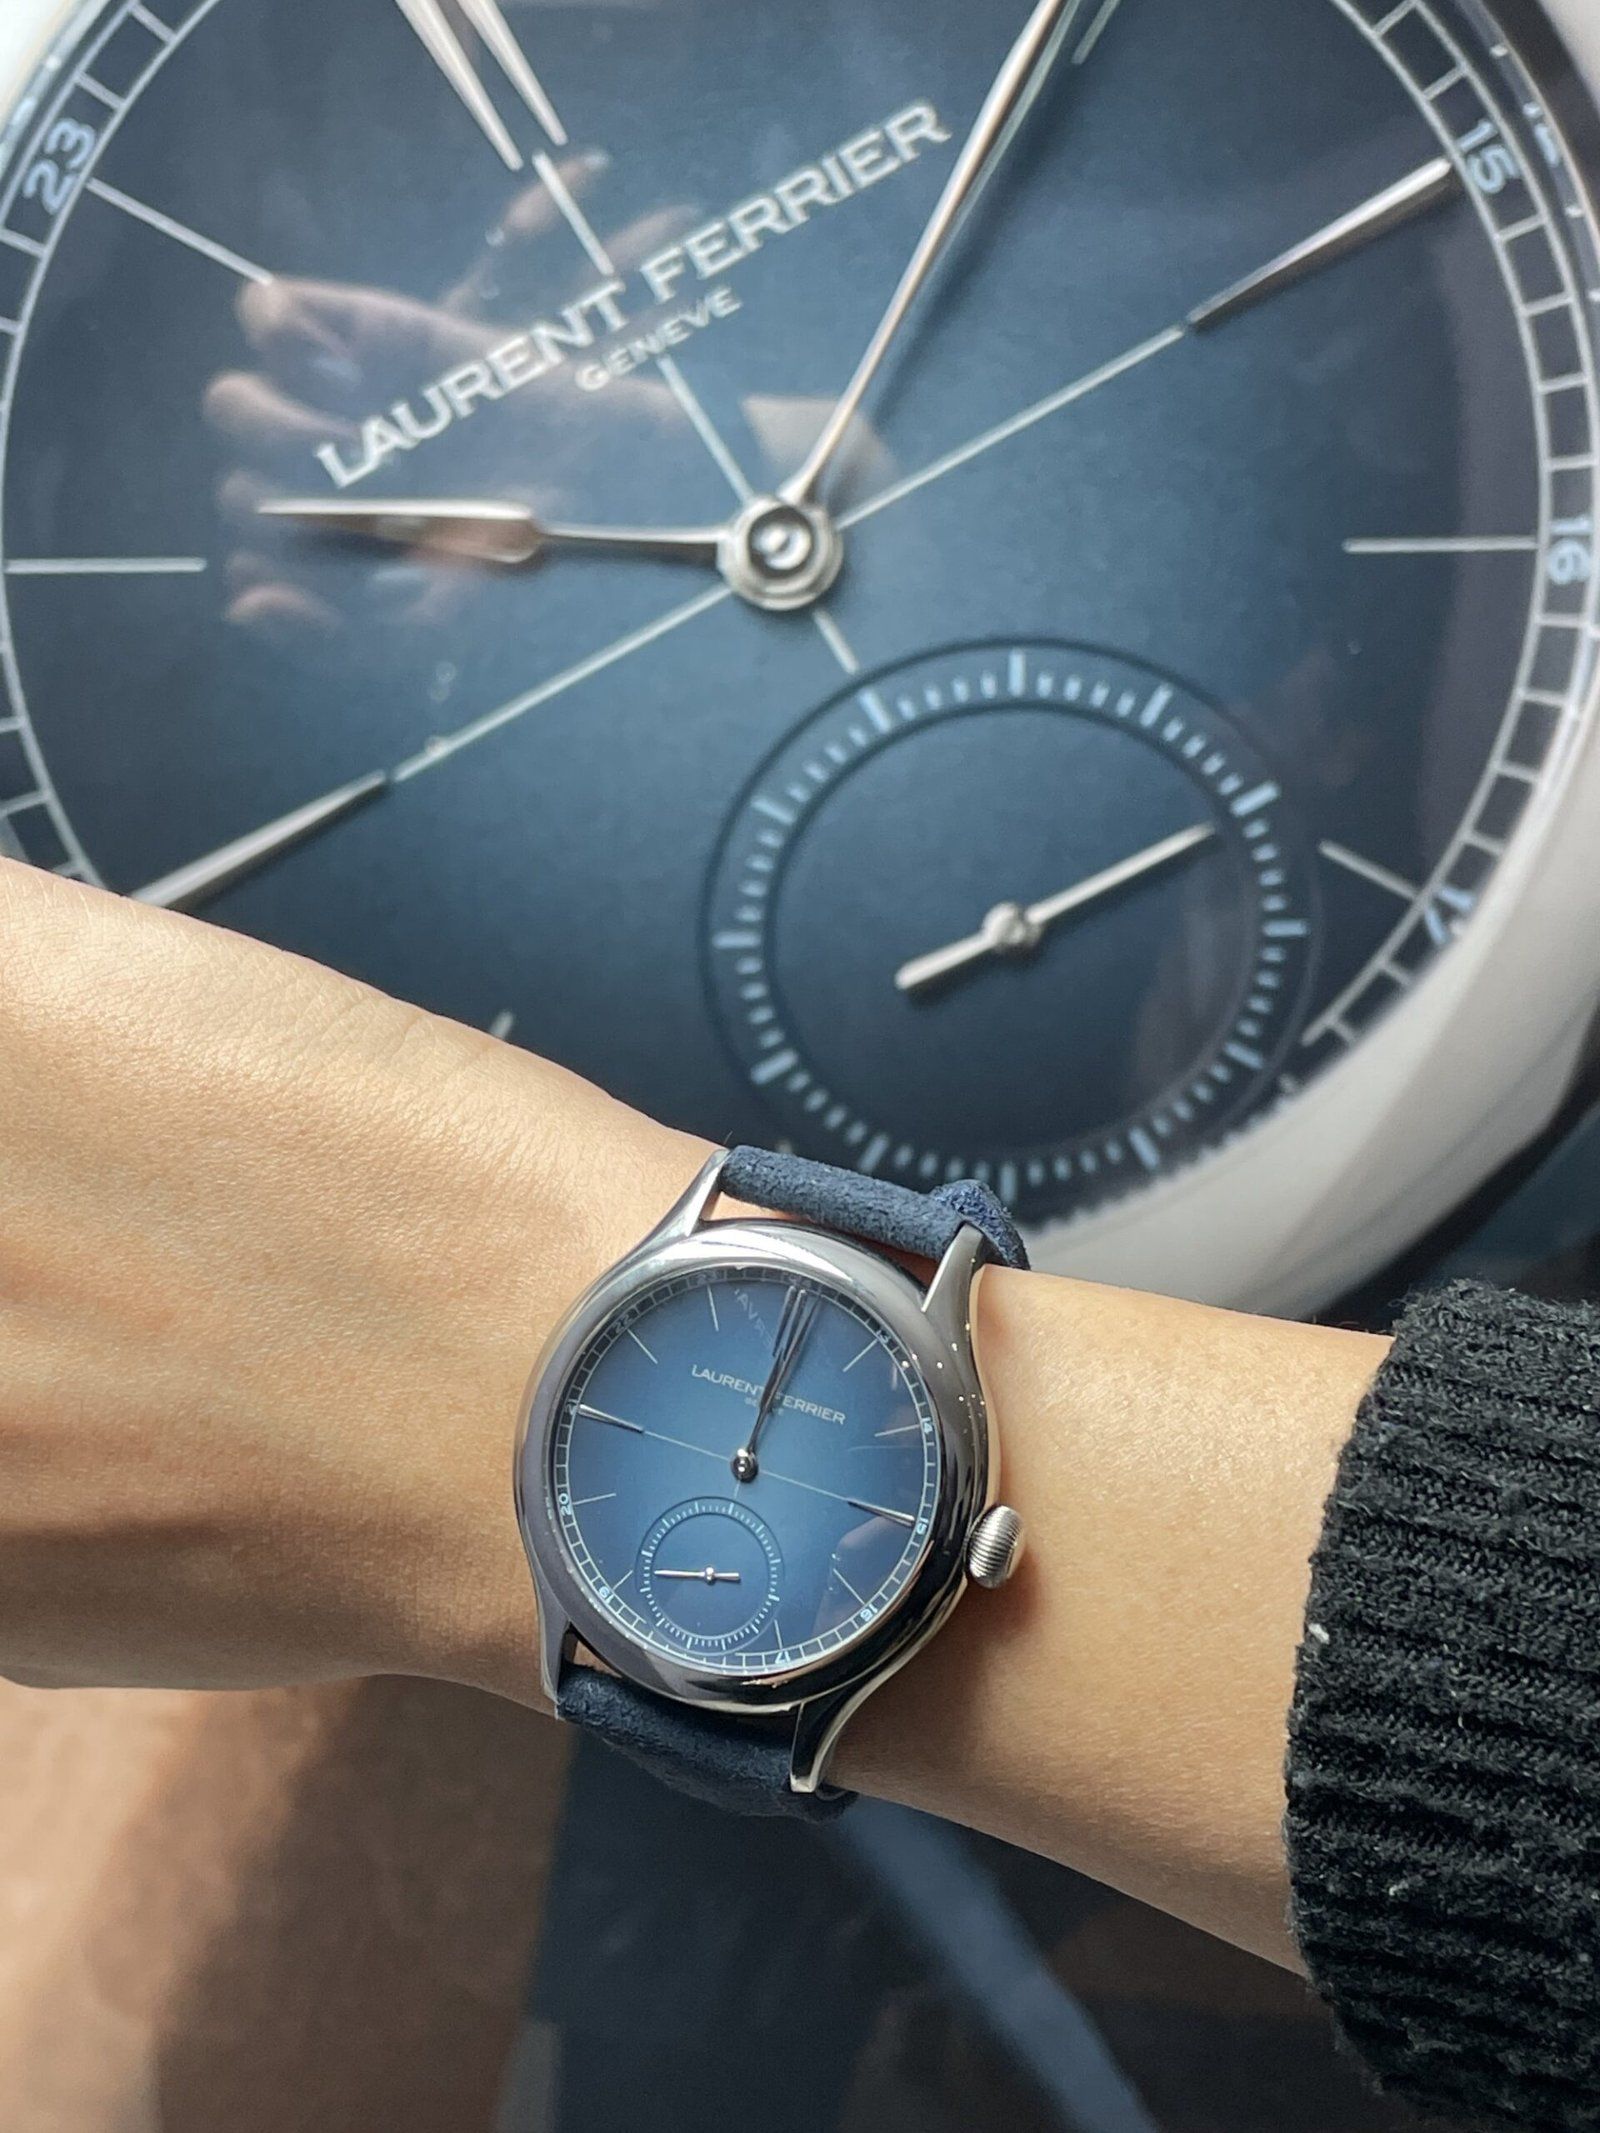 Laurent Ferrier - Watches and Wonders